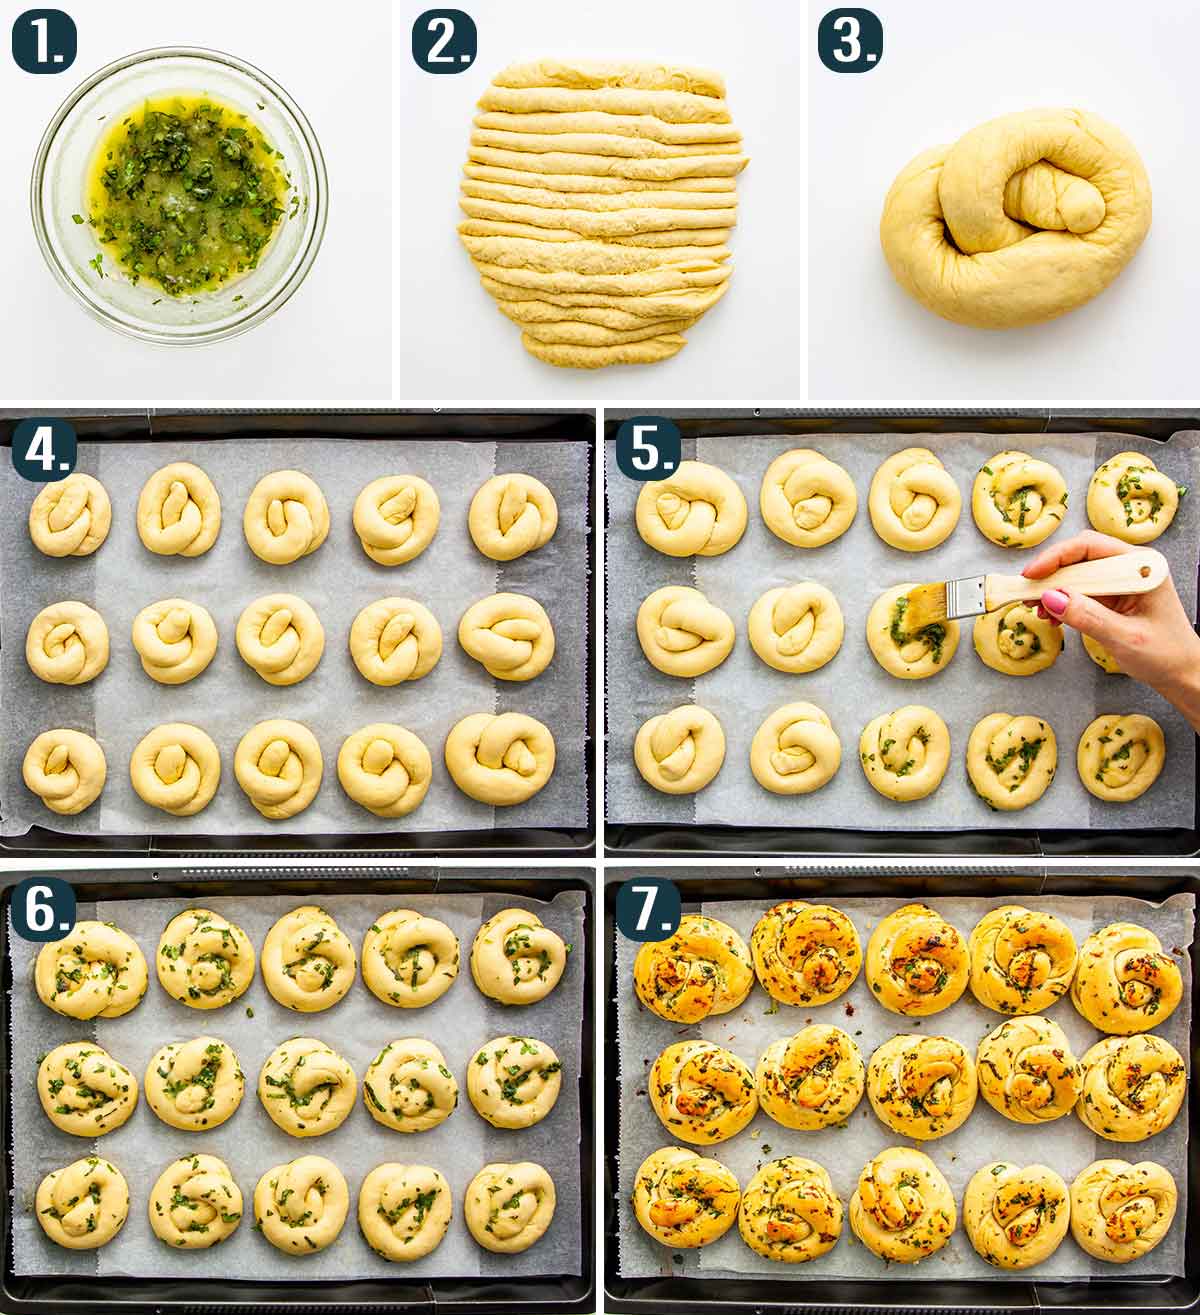 detailed process shots showing how to assemble garlic basil knots and bake them